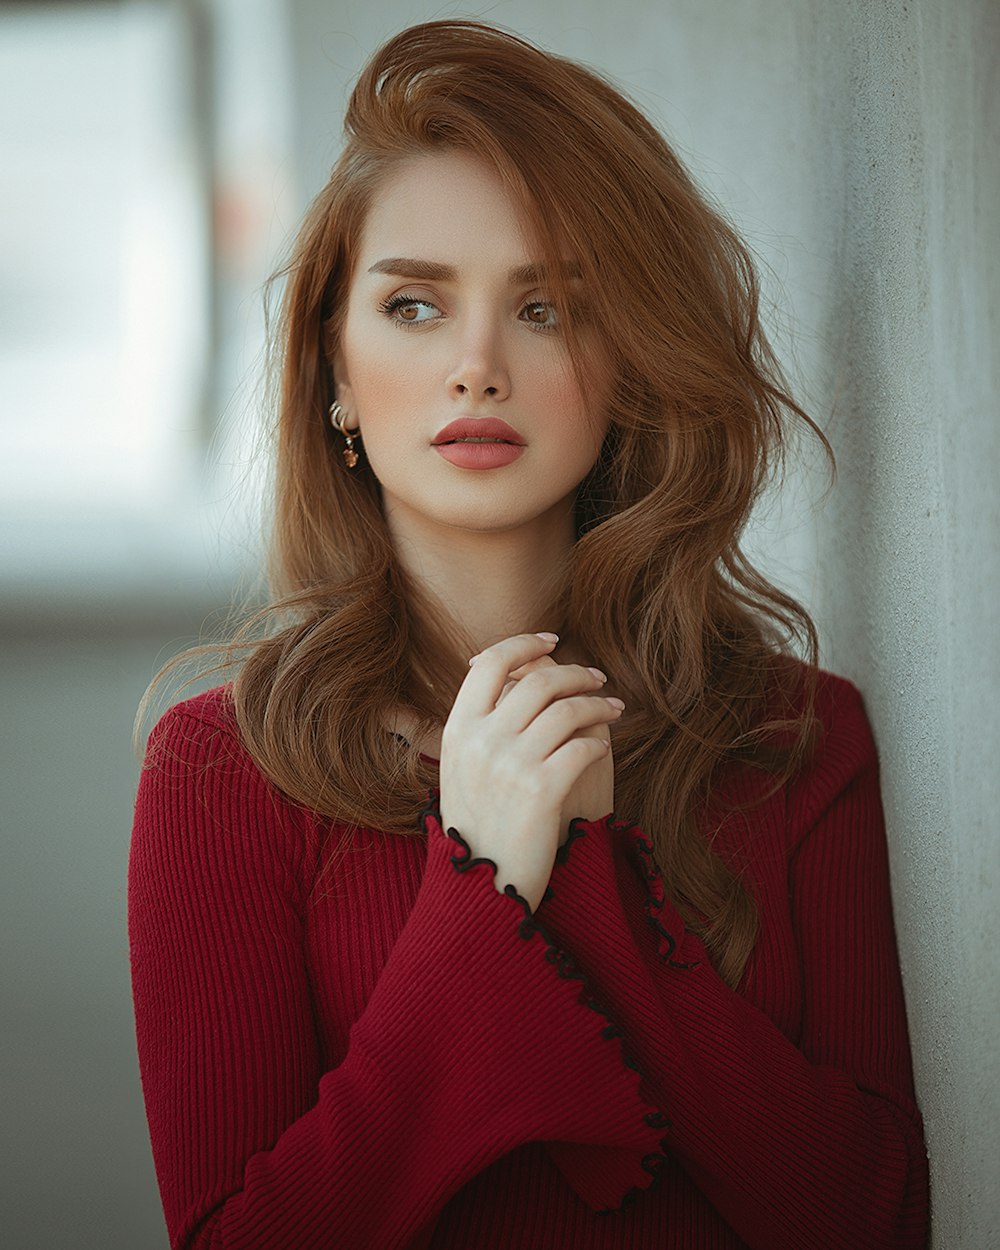 woman in red sweater holding her chin